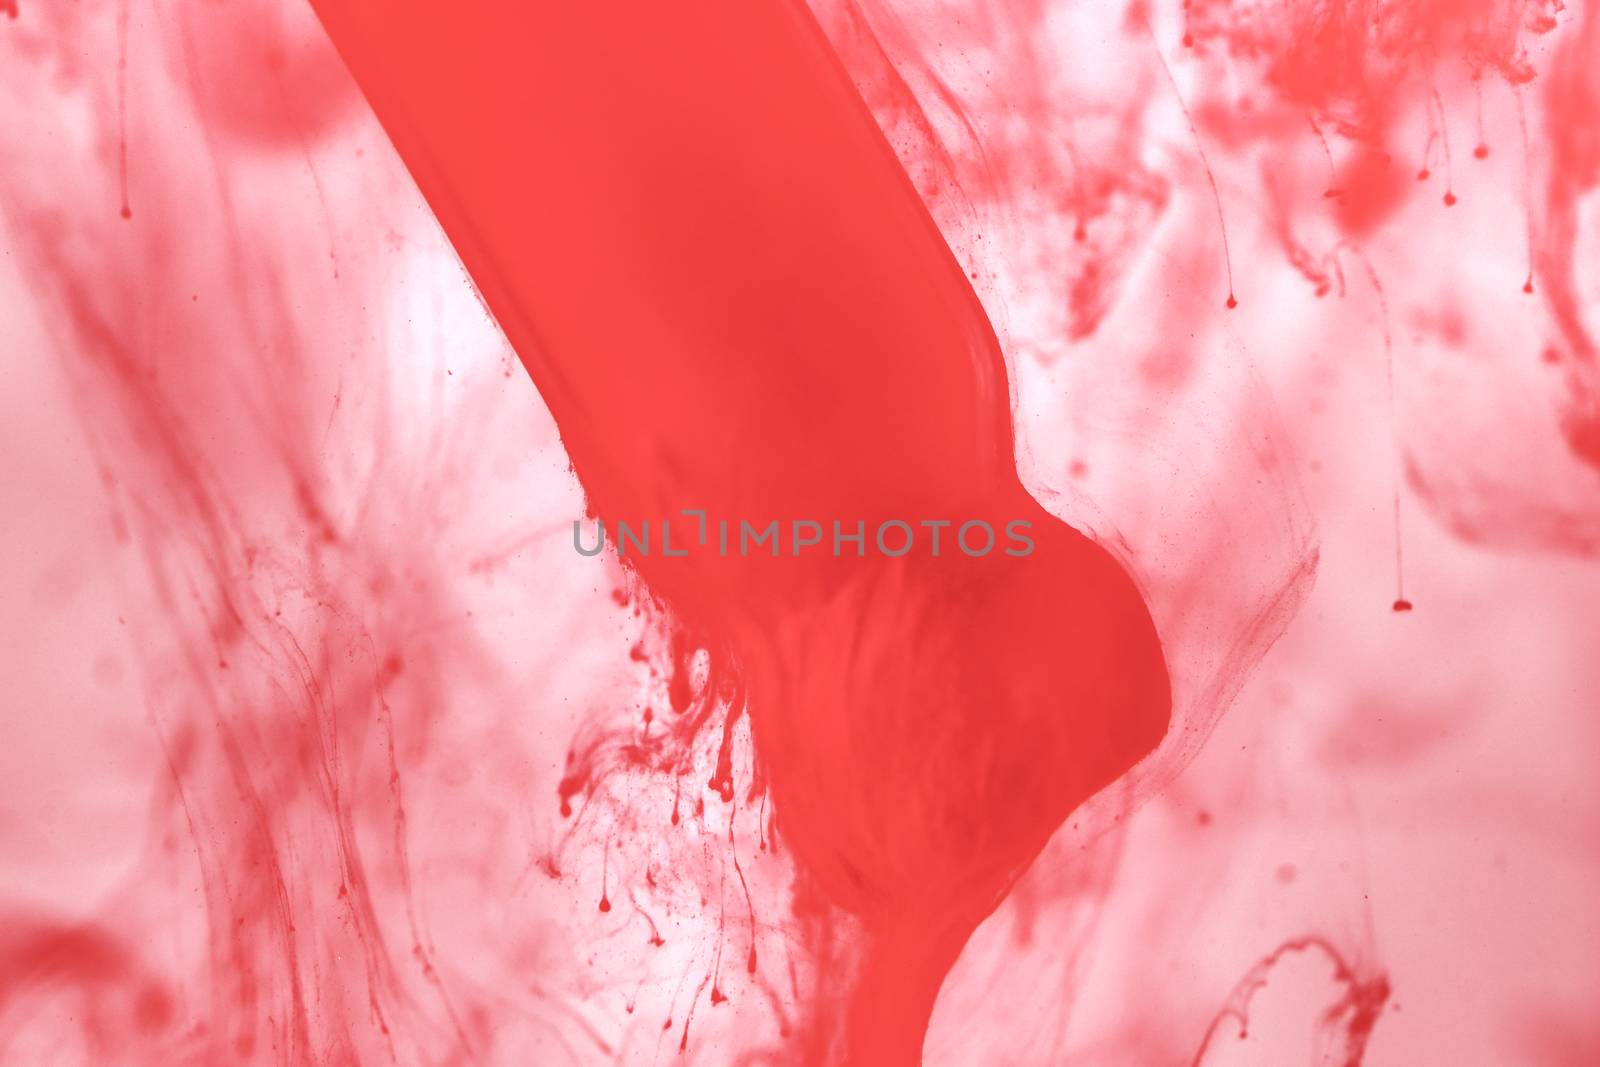 Science and art experiment color dripping into red template bright red background image concept.